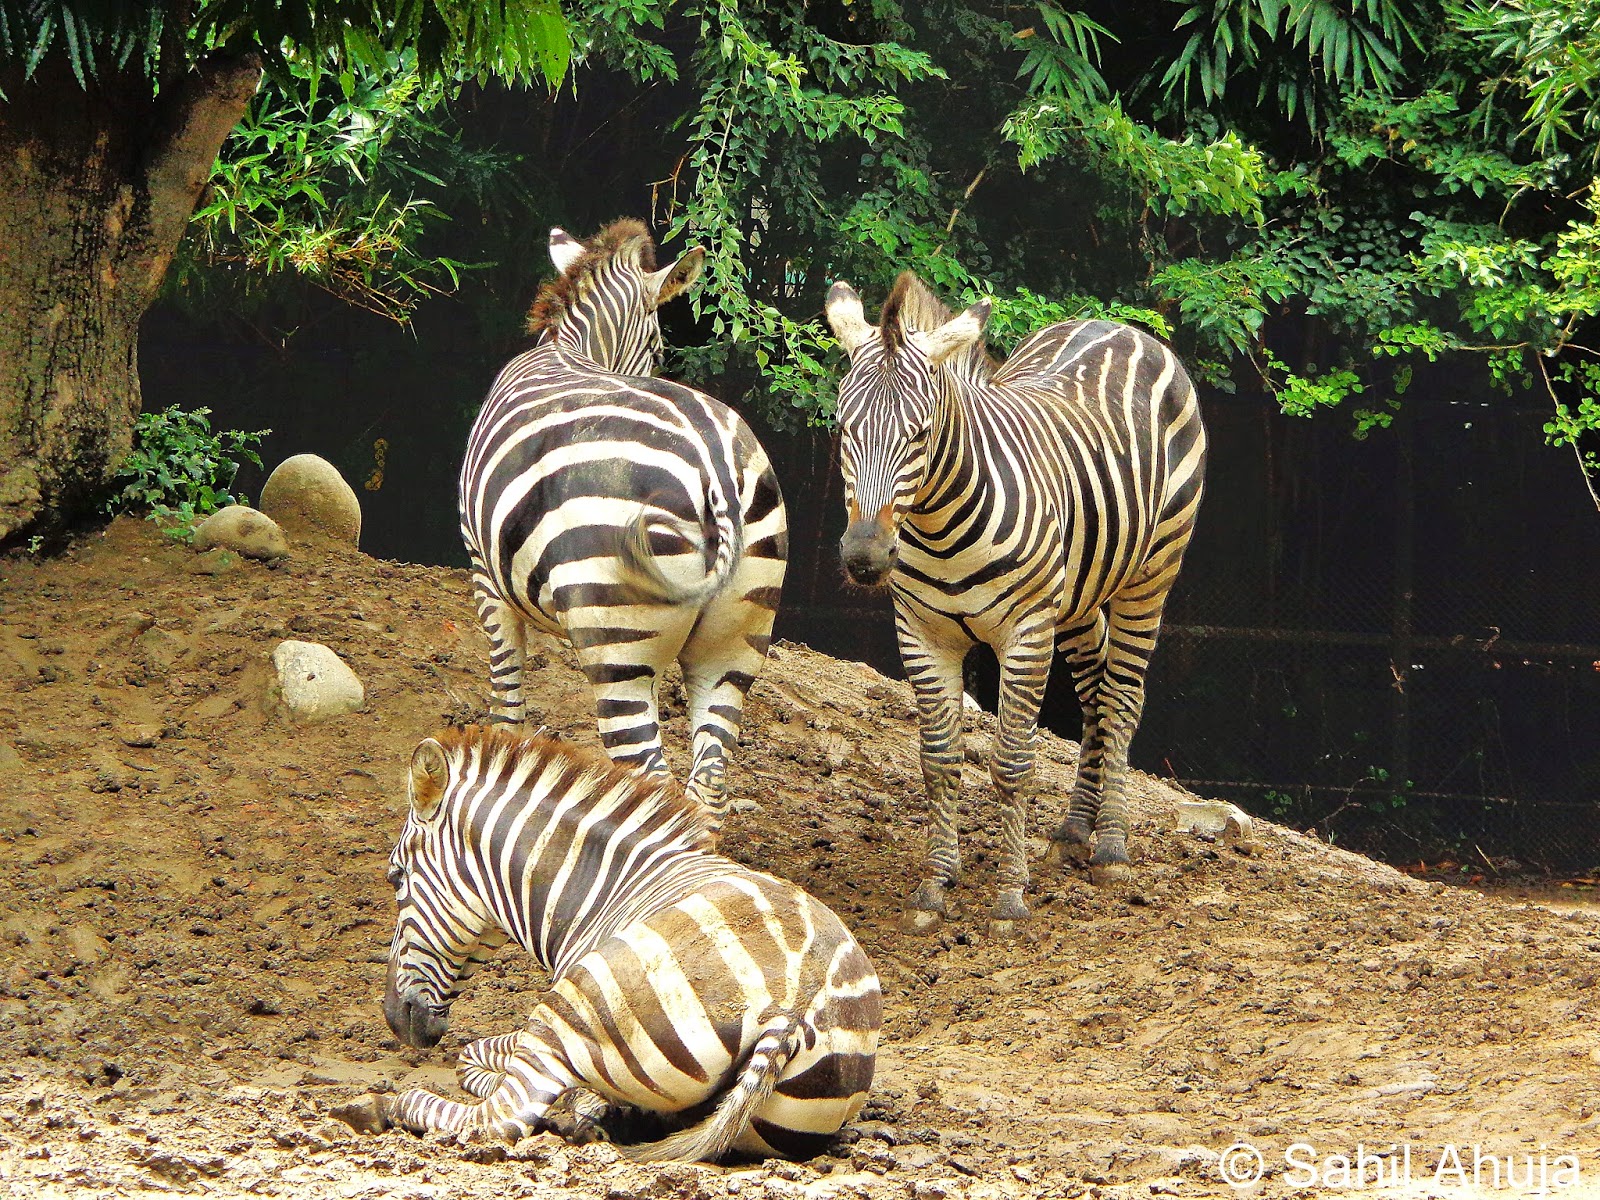 10 Biggest Zoos In India That Will Leave You Flabbergasted - RVCJ Media